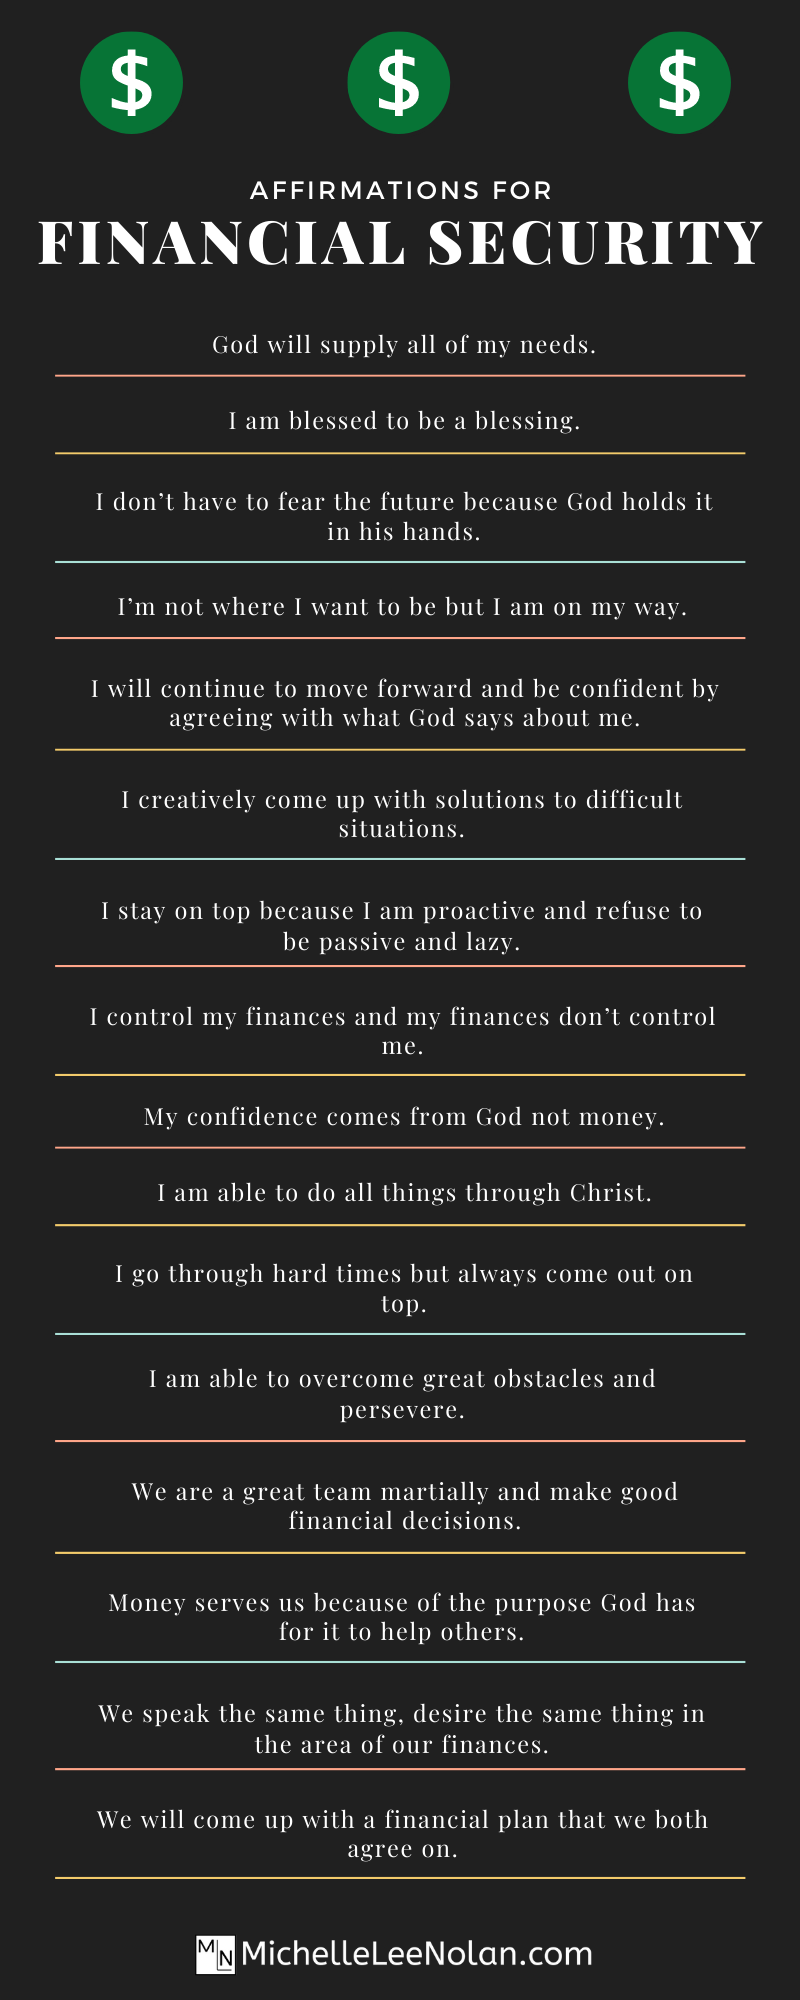 Beat financial insecurity with these positive affirmations